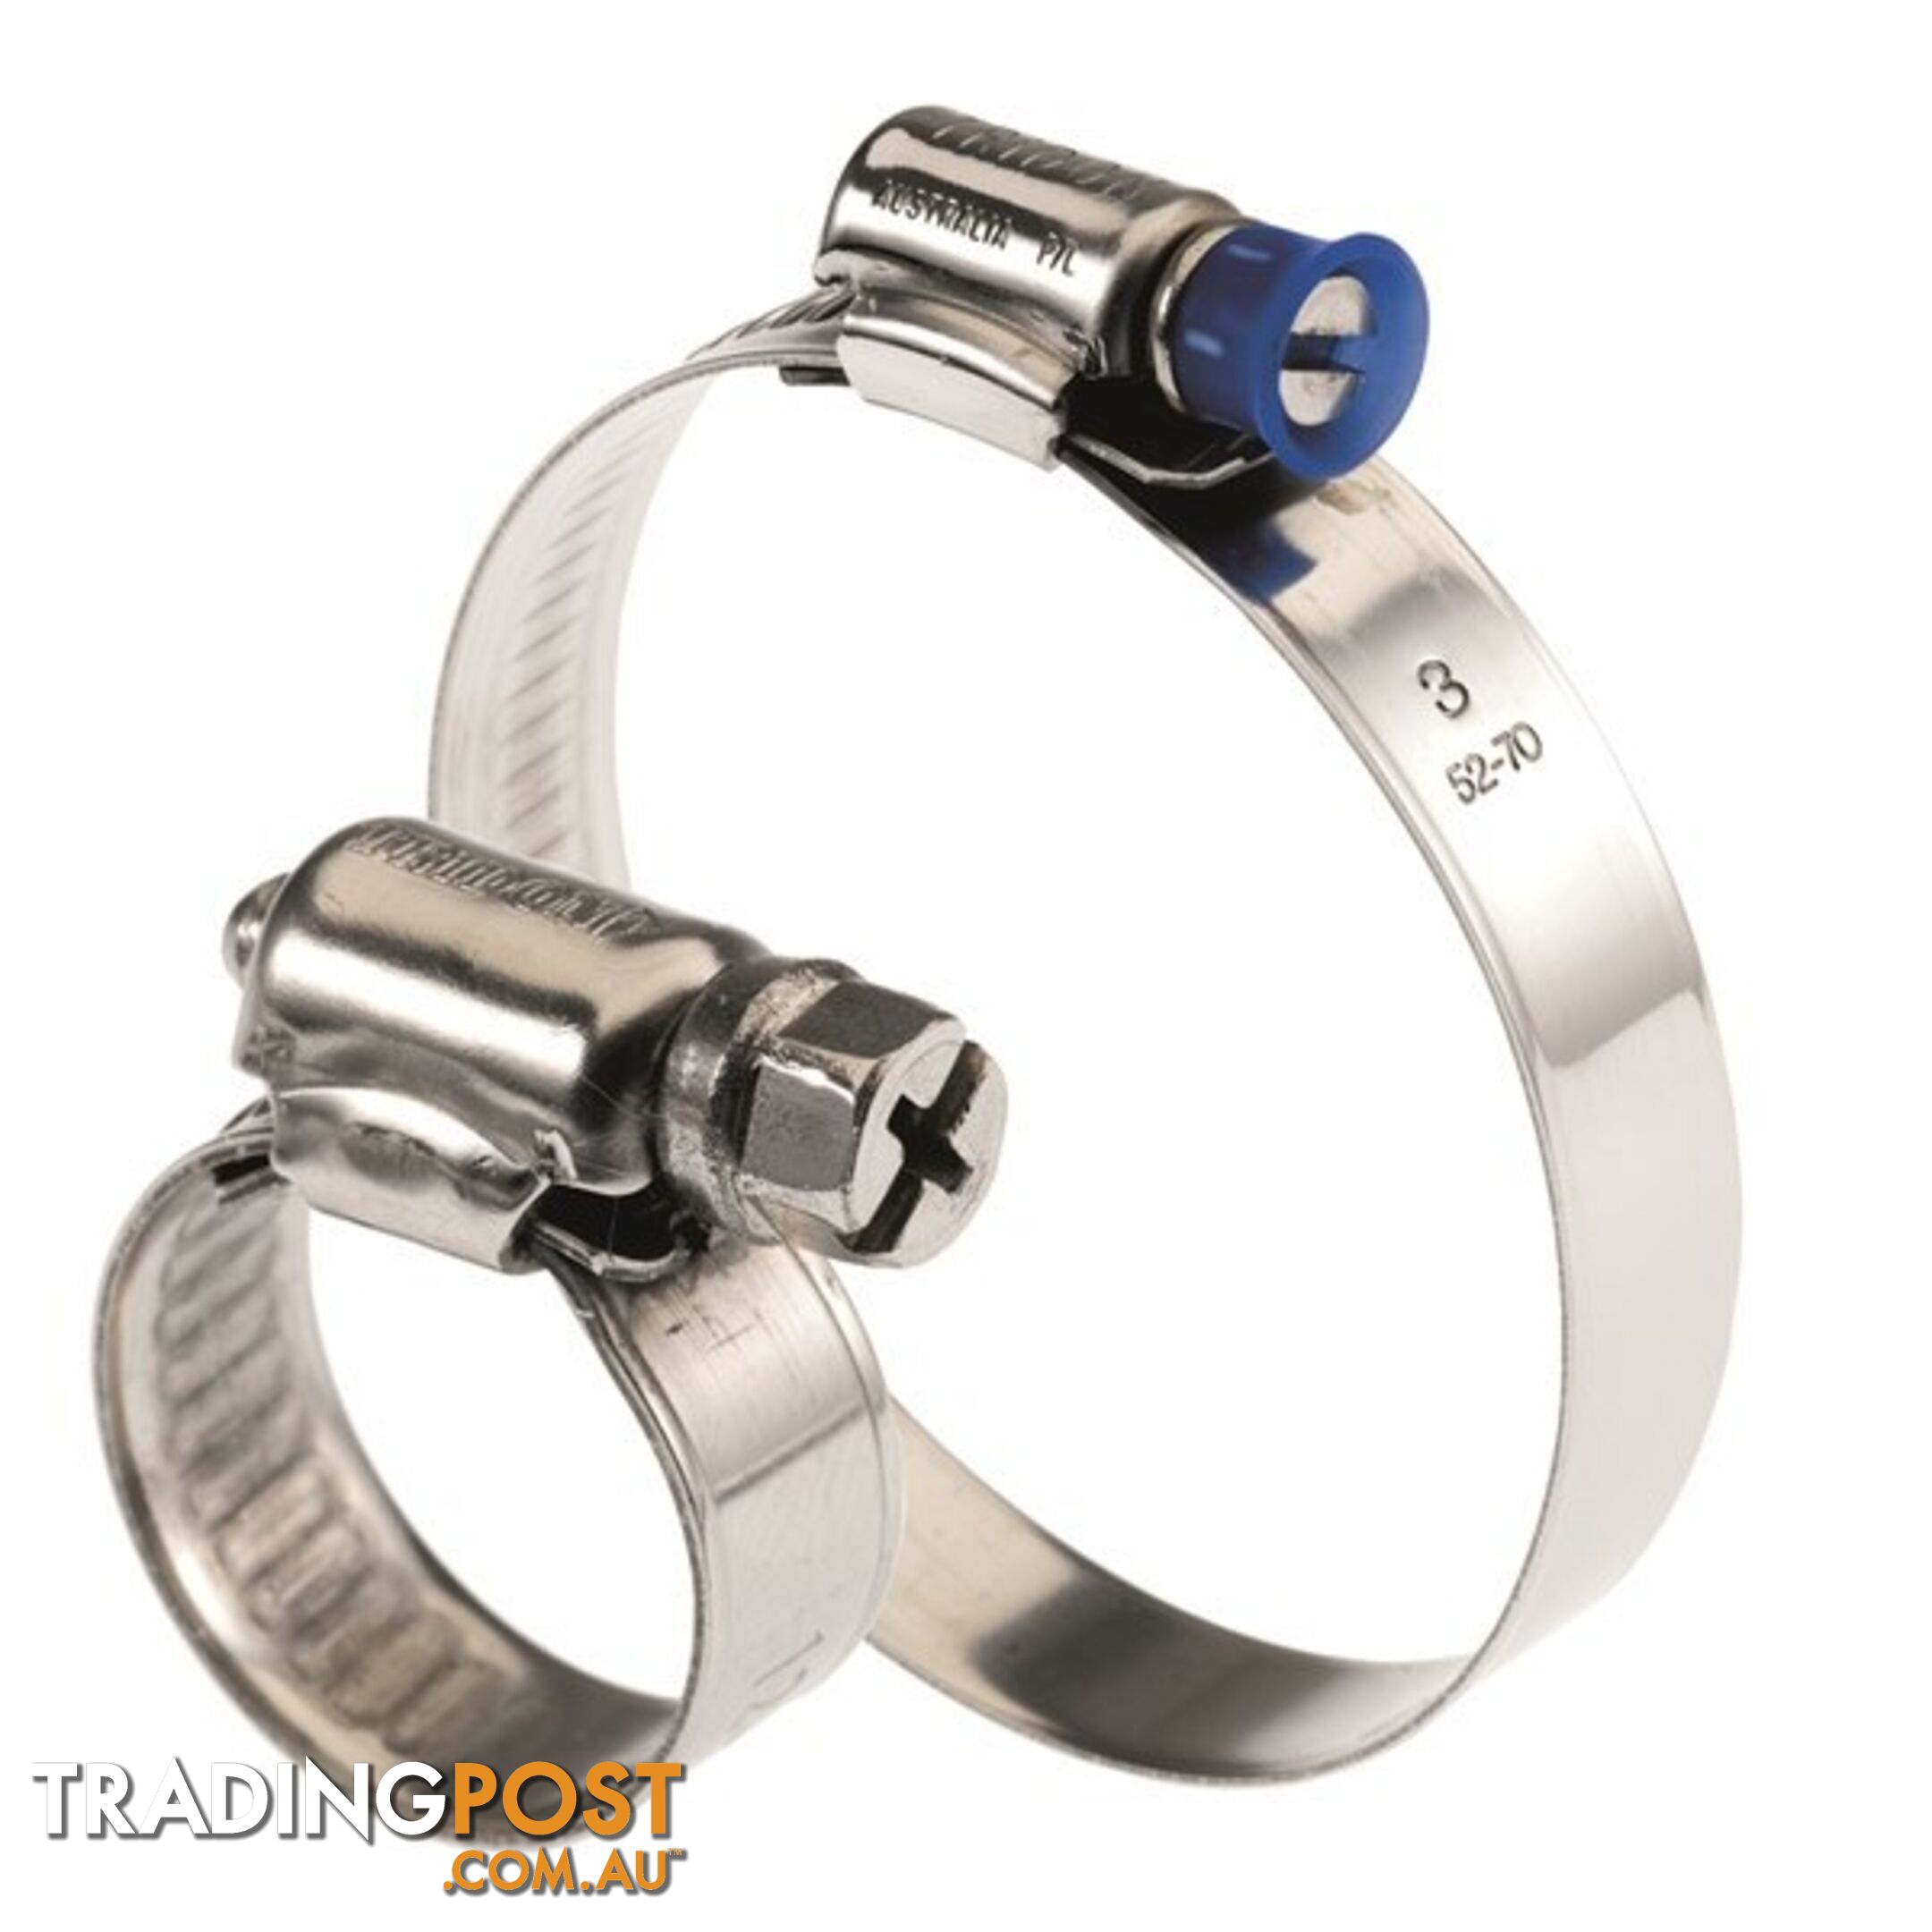 Tridon Hose Clamp 16 -24mm Solid Micro Band Collared (8mm wide) Full S. Steel 10pk SKU - SMPC0AP